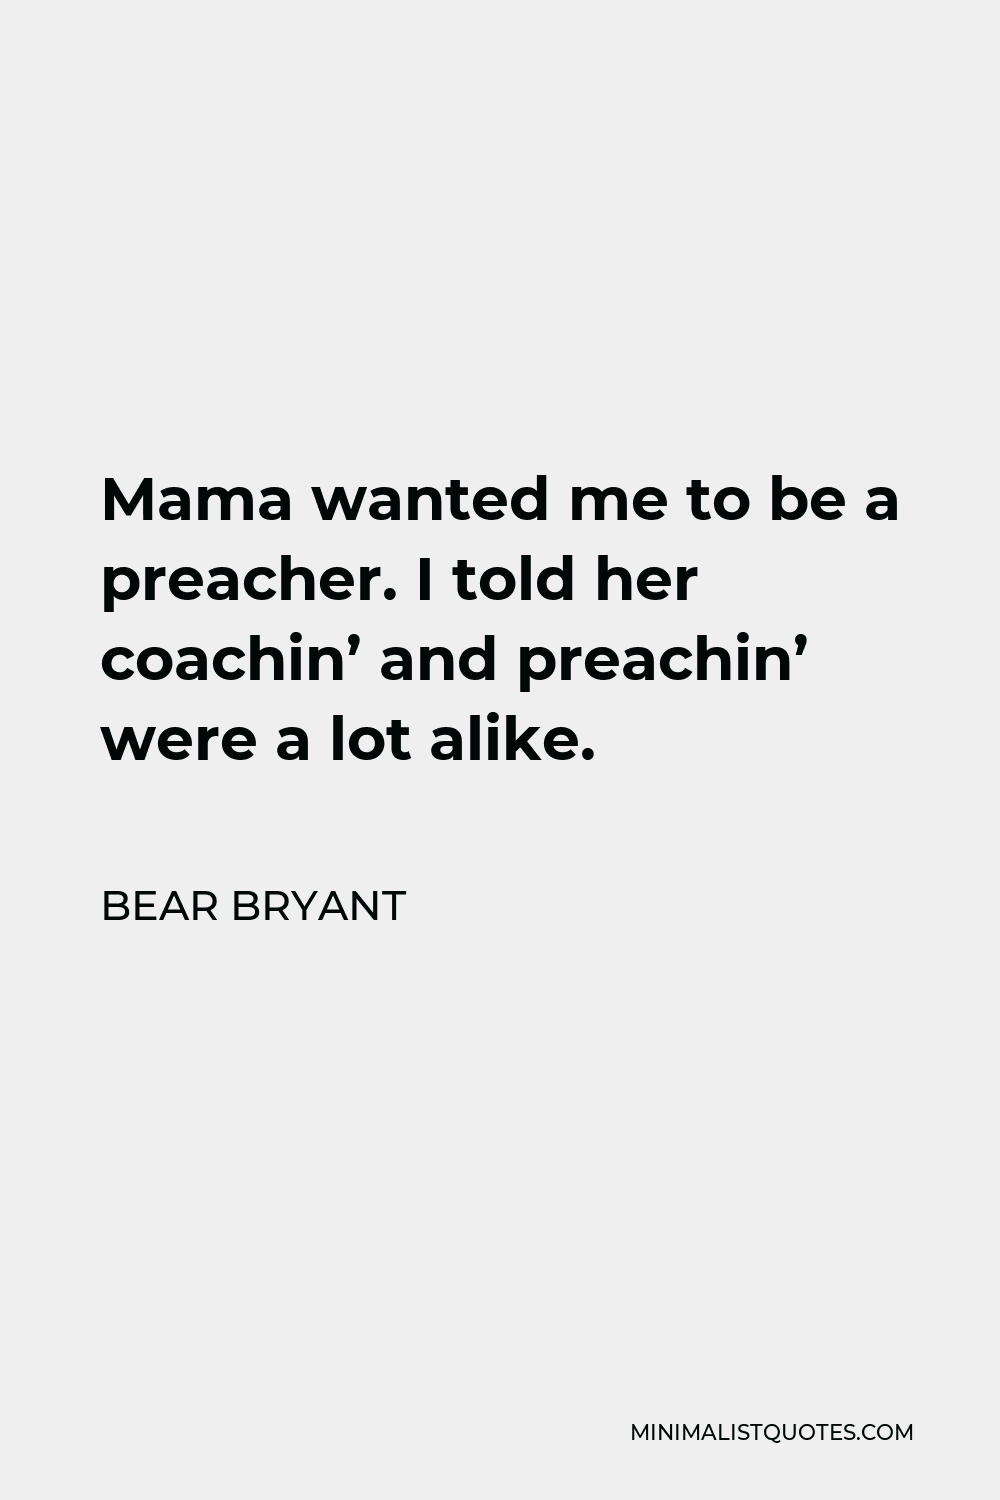 Bear Bryant Quote - Mama wanted me to be a preacher. I told her coachin’ and preachin’ were a lot alike.